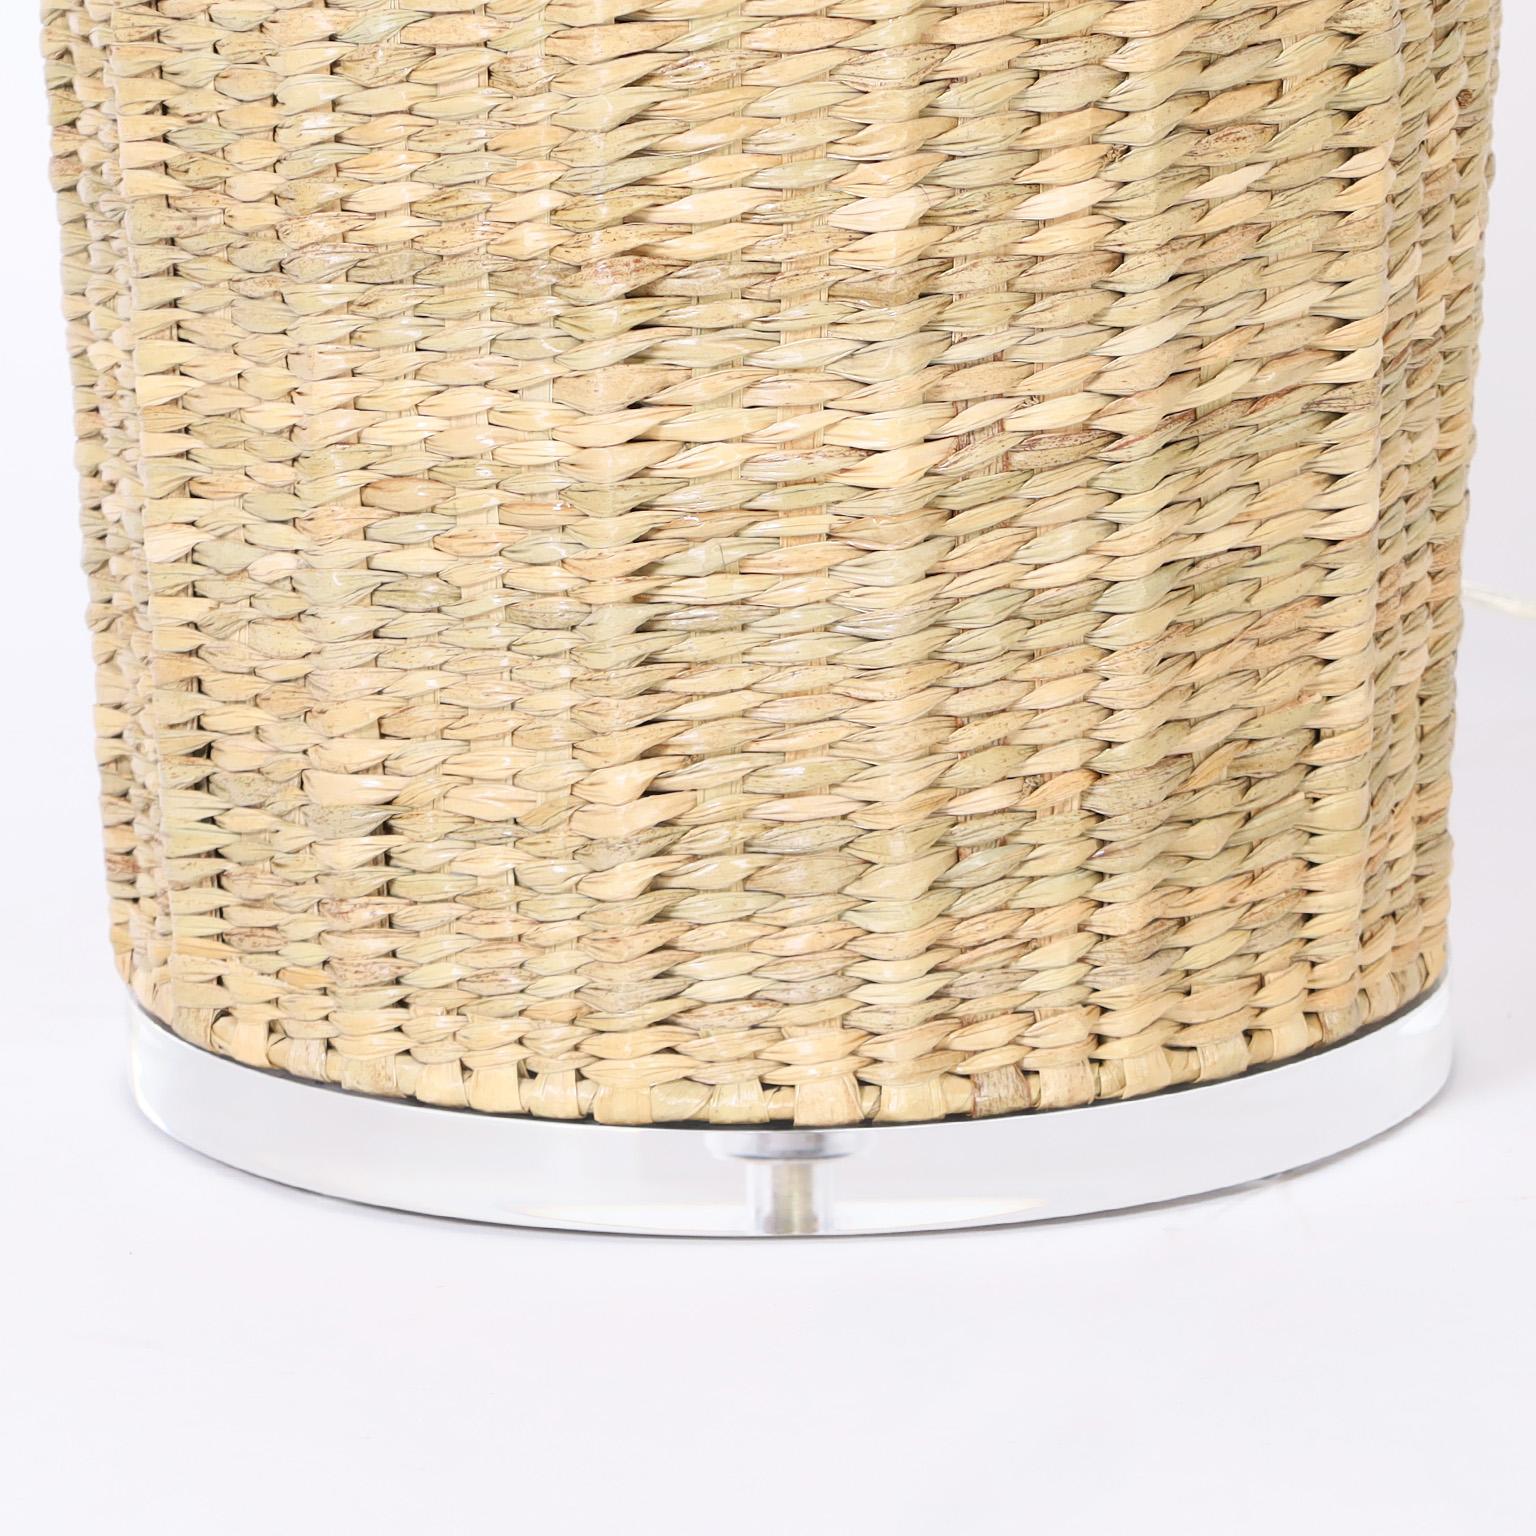 Hand-Woven Pair of Wicker Bottle Form Table Lamps from the FS Flores Collection For Sale